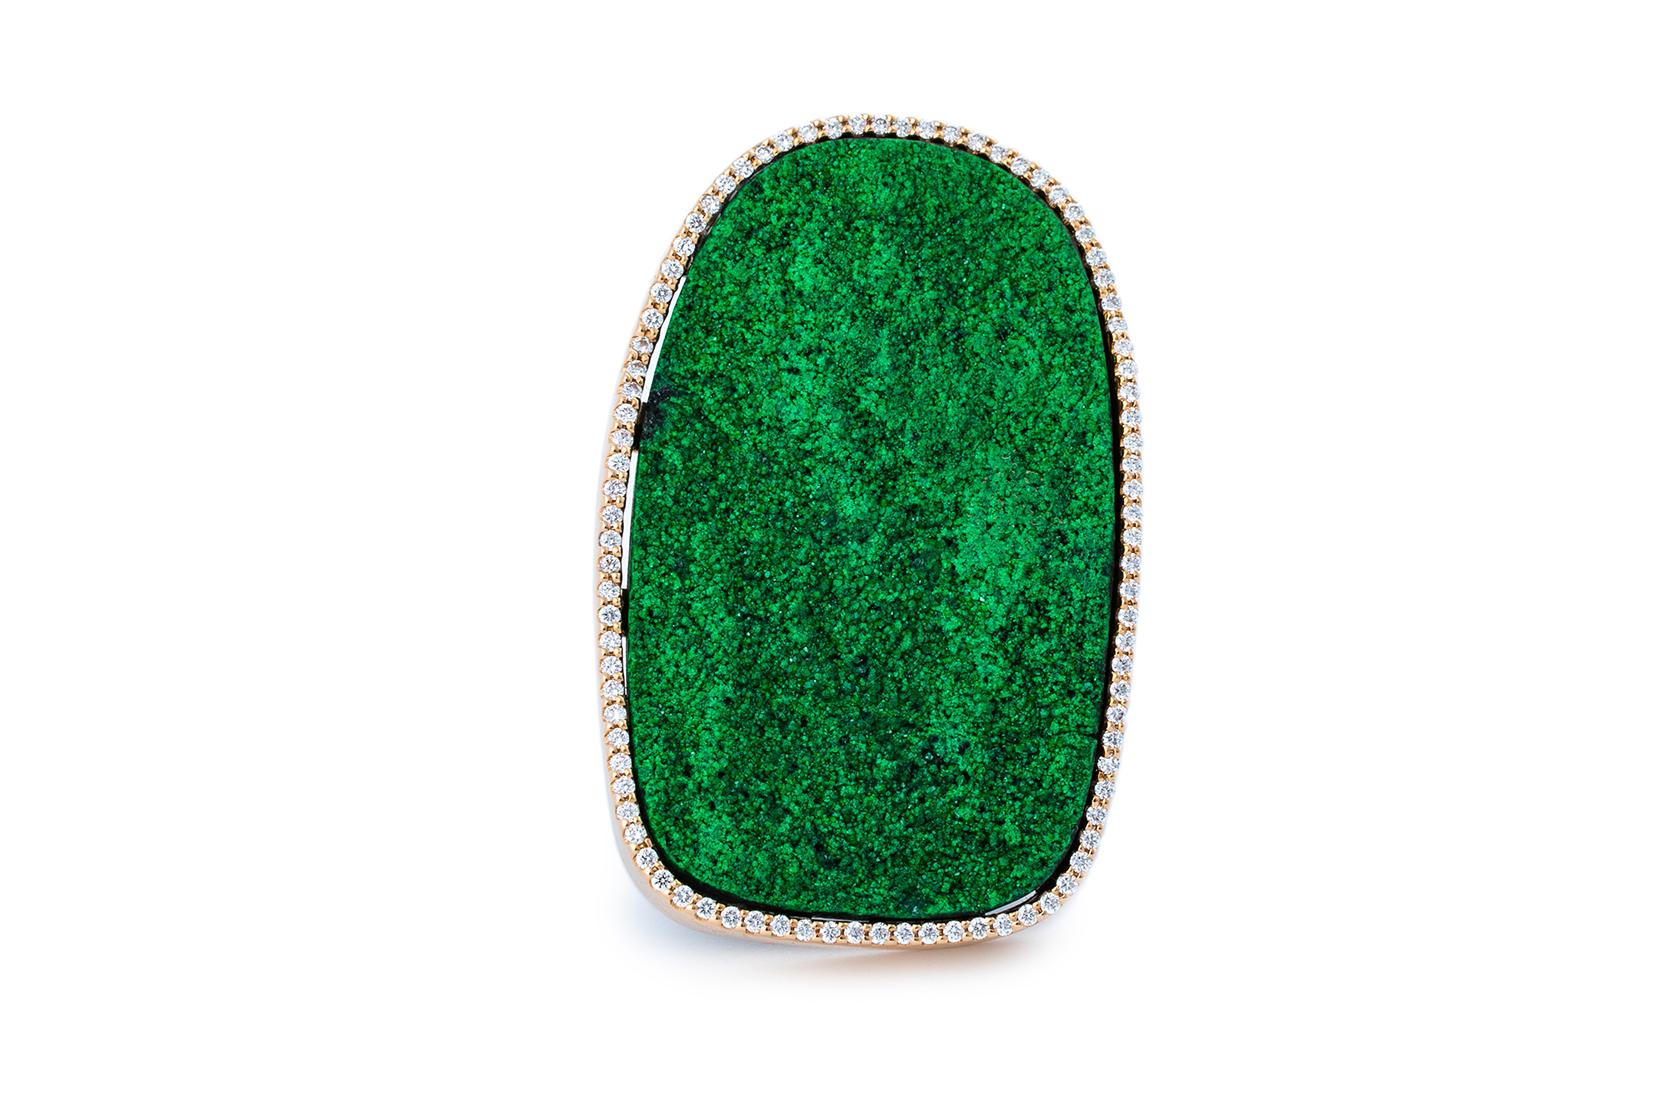 Karolin Green Uvarovite Diamond Pave Cocktail Ring with 18 Karat Rose Gold In New Condition For Sale In Antwerp, BE